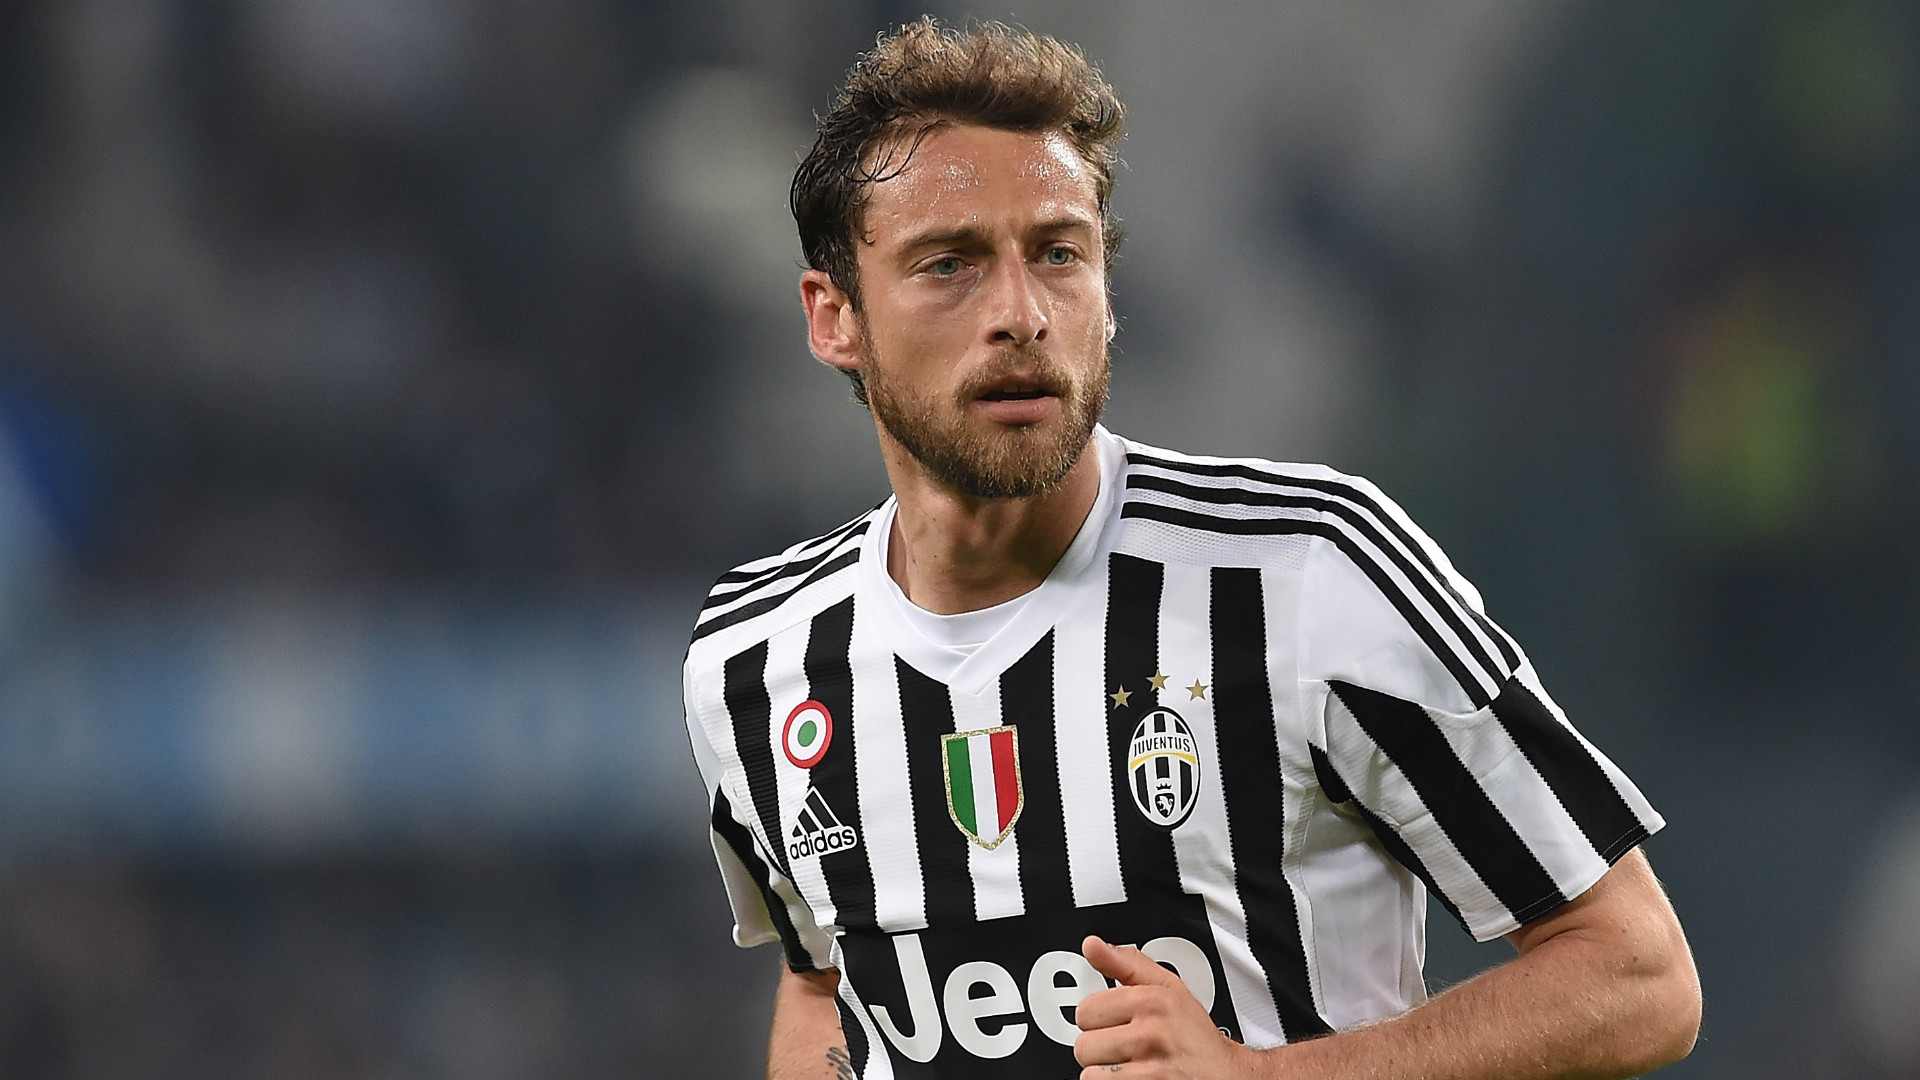 Juventus Boss Allegri To Be Cautious With Marchisio Goal